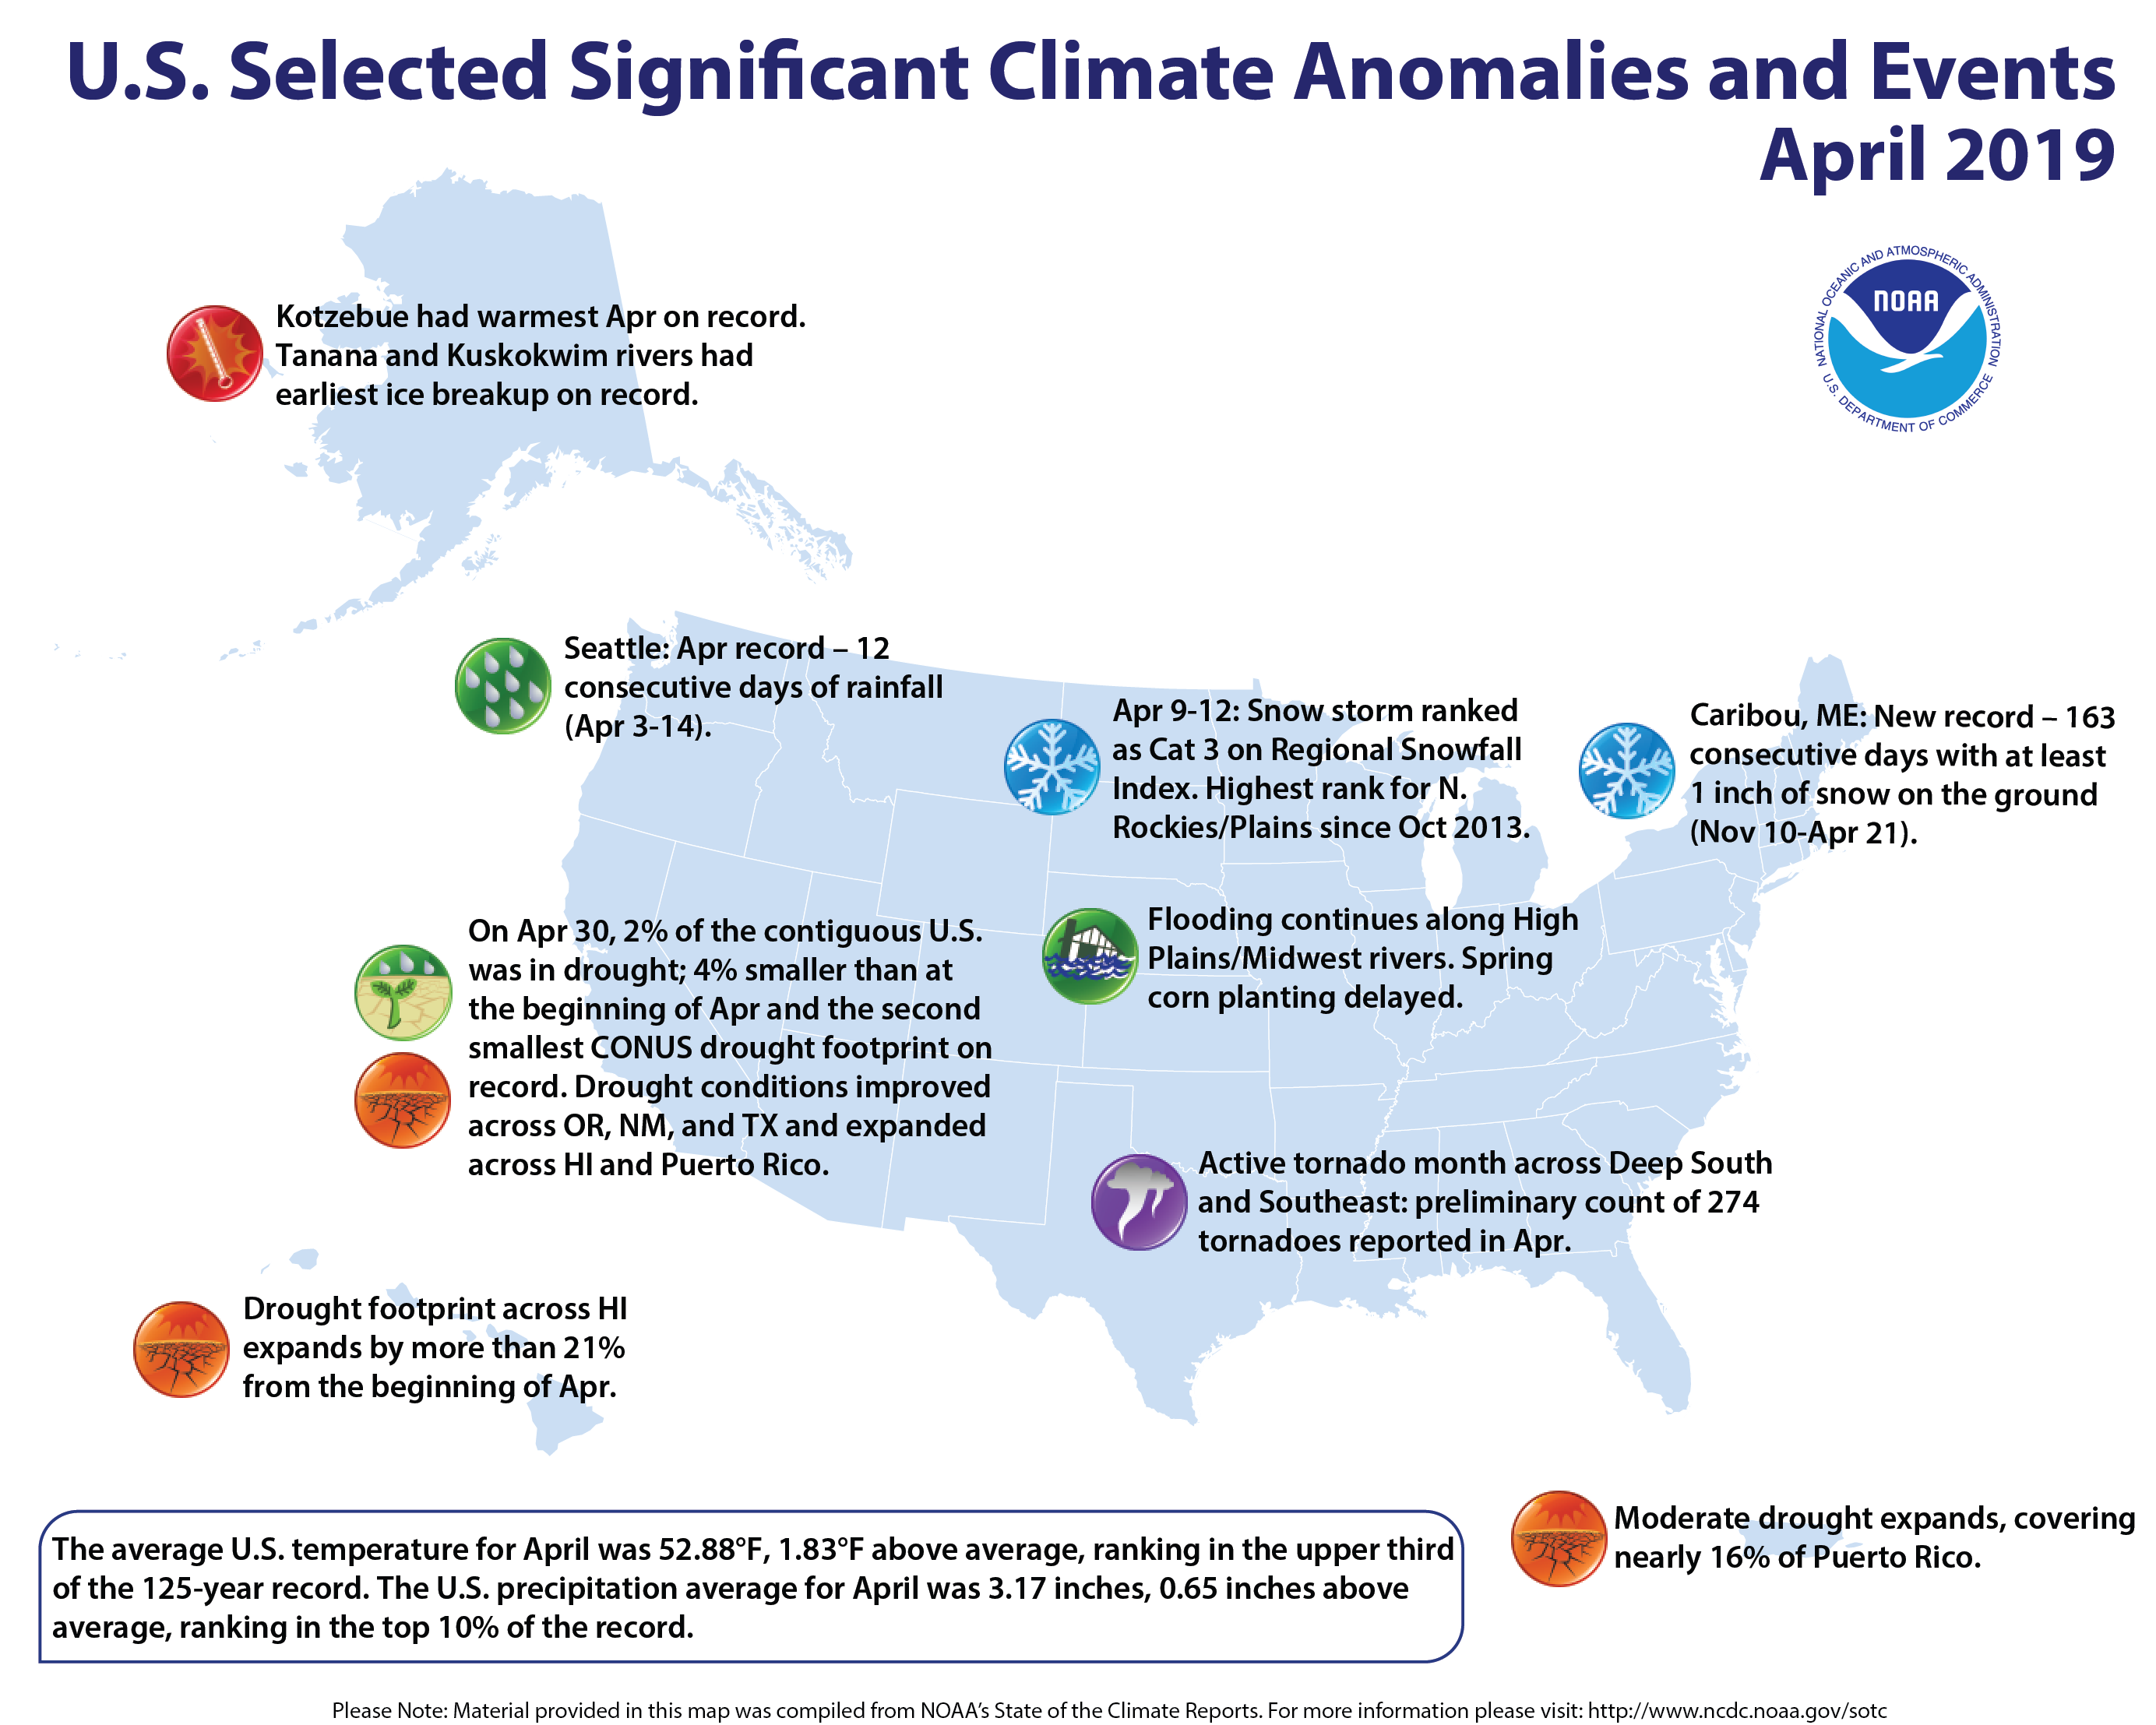 An annotated map of the United States showing notable climate events that occurred across the country during April 2019. For details, see the bulleted list below in the story and online at http://bit.ly/USClimate201904.